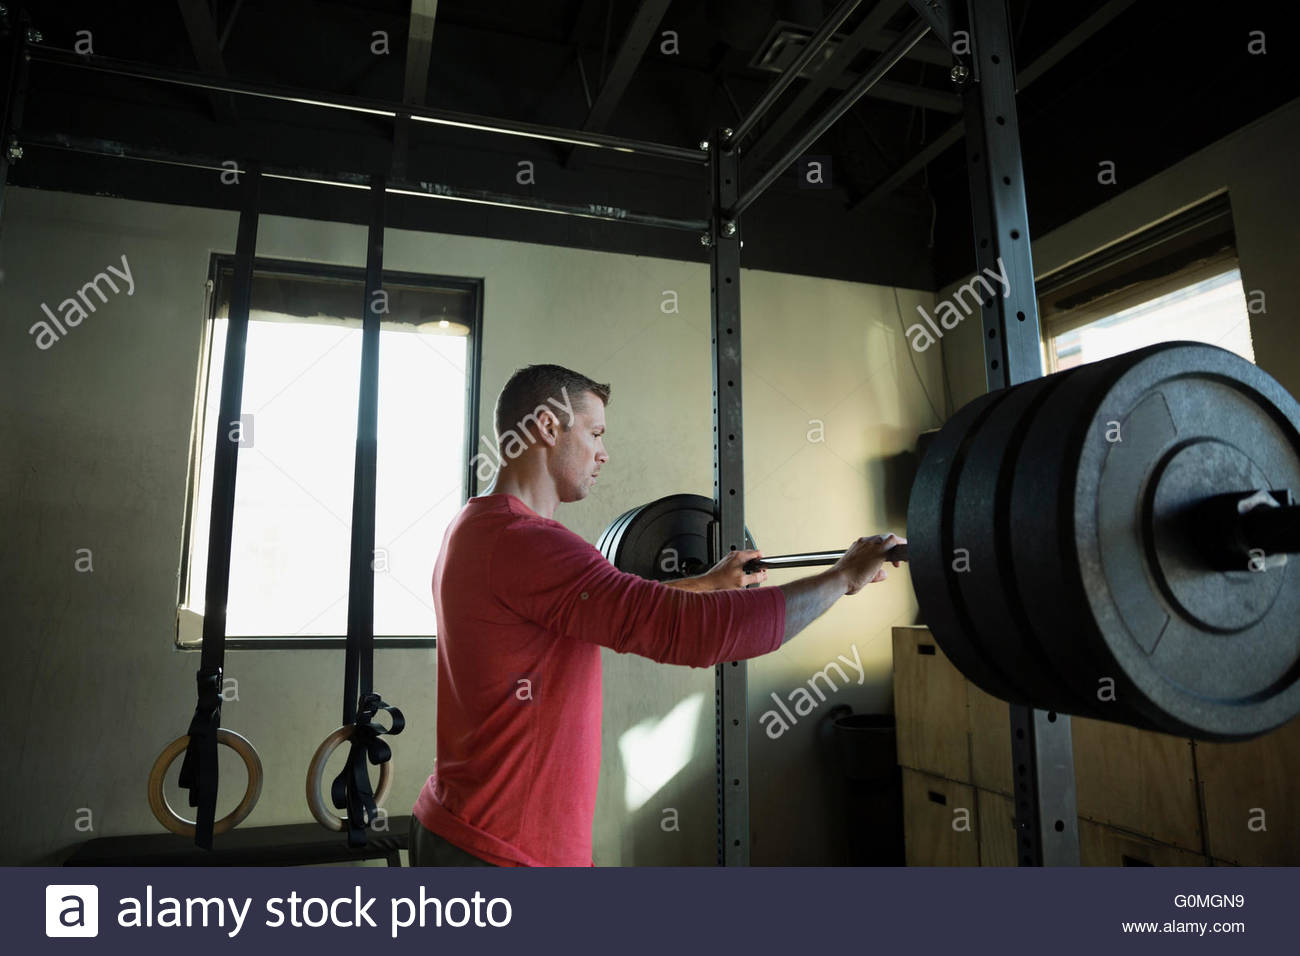 Man standing at squat barbell rack at gym Stock Photo